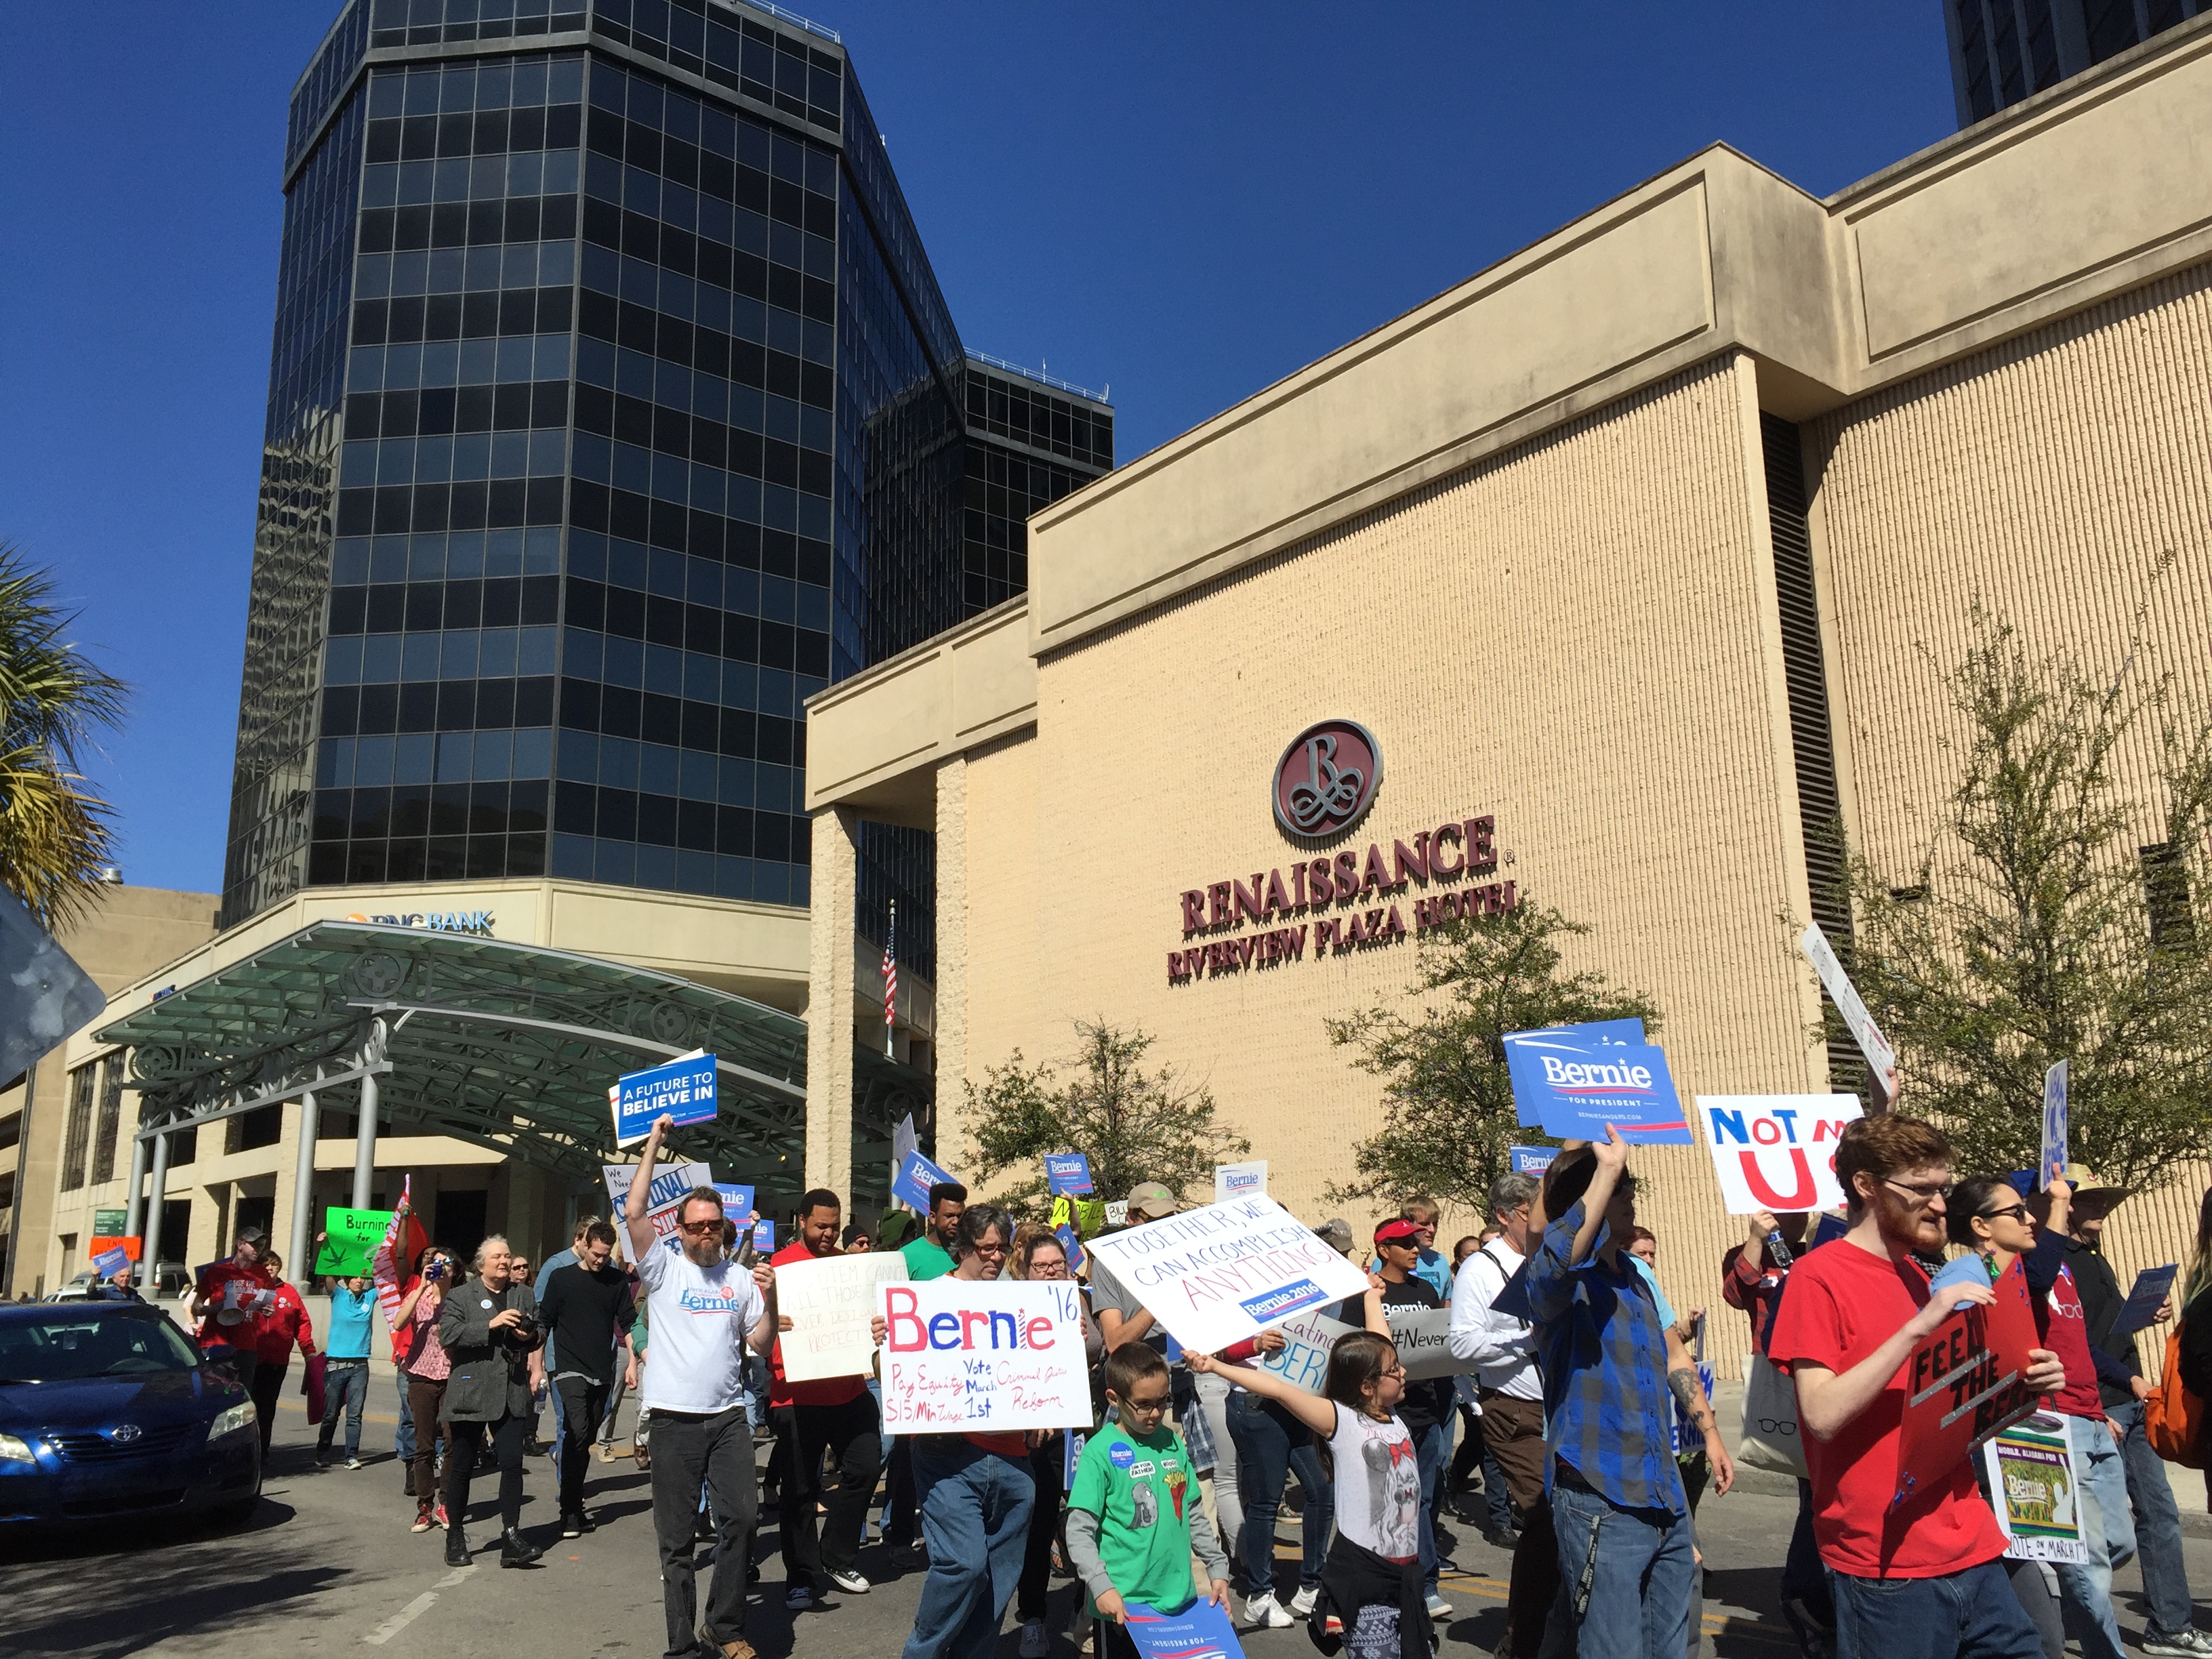 IMG 1144 - Bernie Sanders Enthusiasts Take to The Streets in Advance of Super Tuesday's Vote